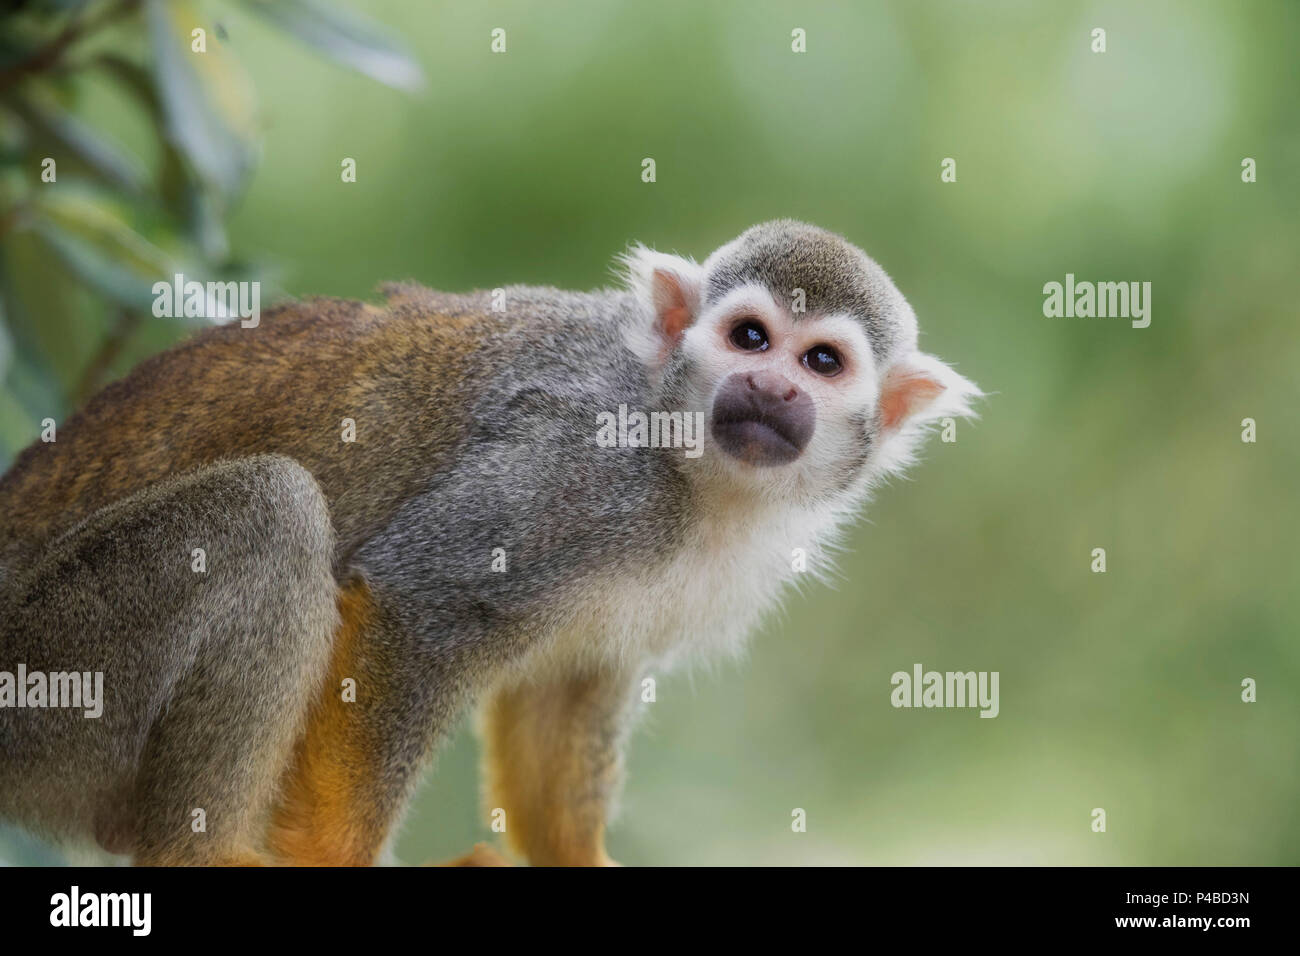 Spider monkey looking and gazing up cute Stock Photo